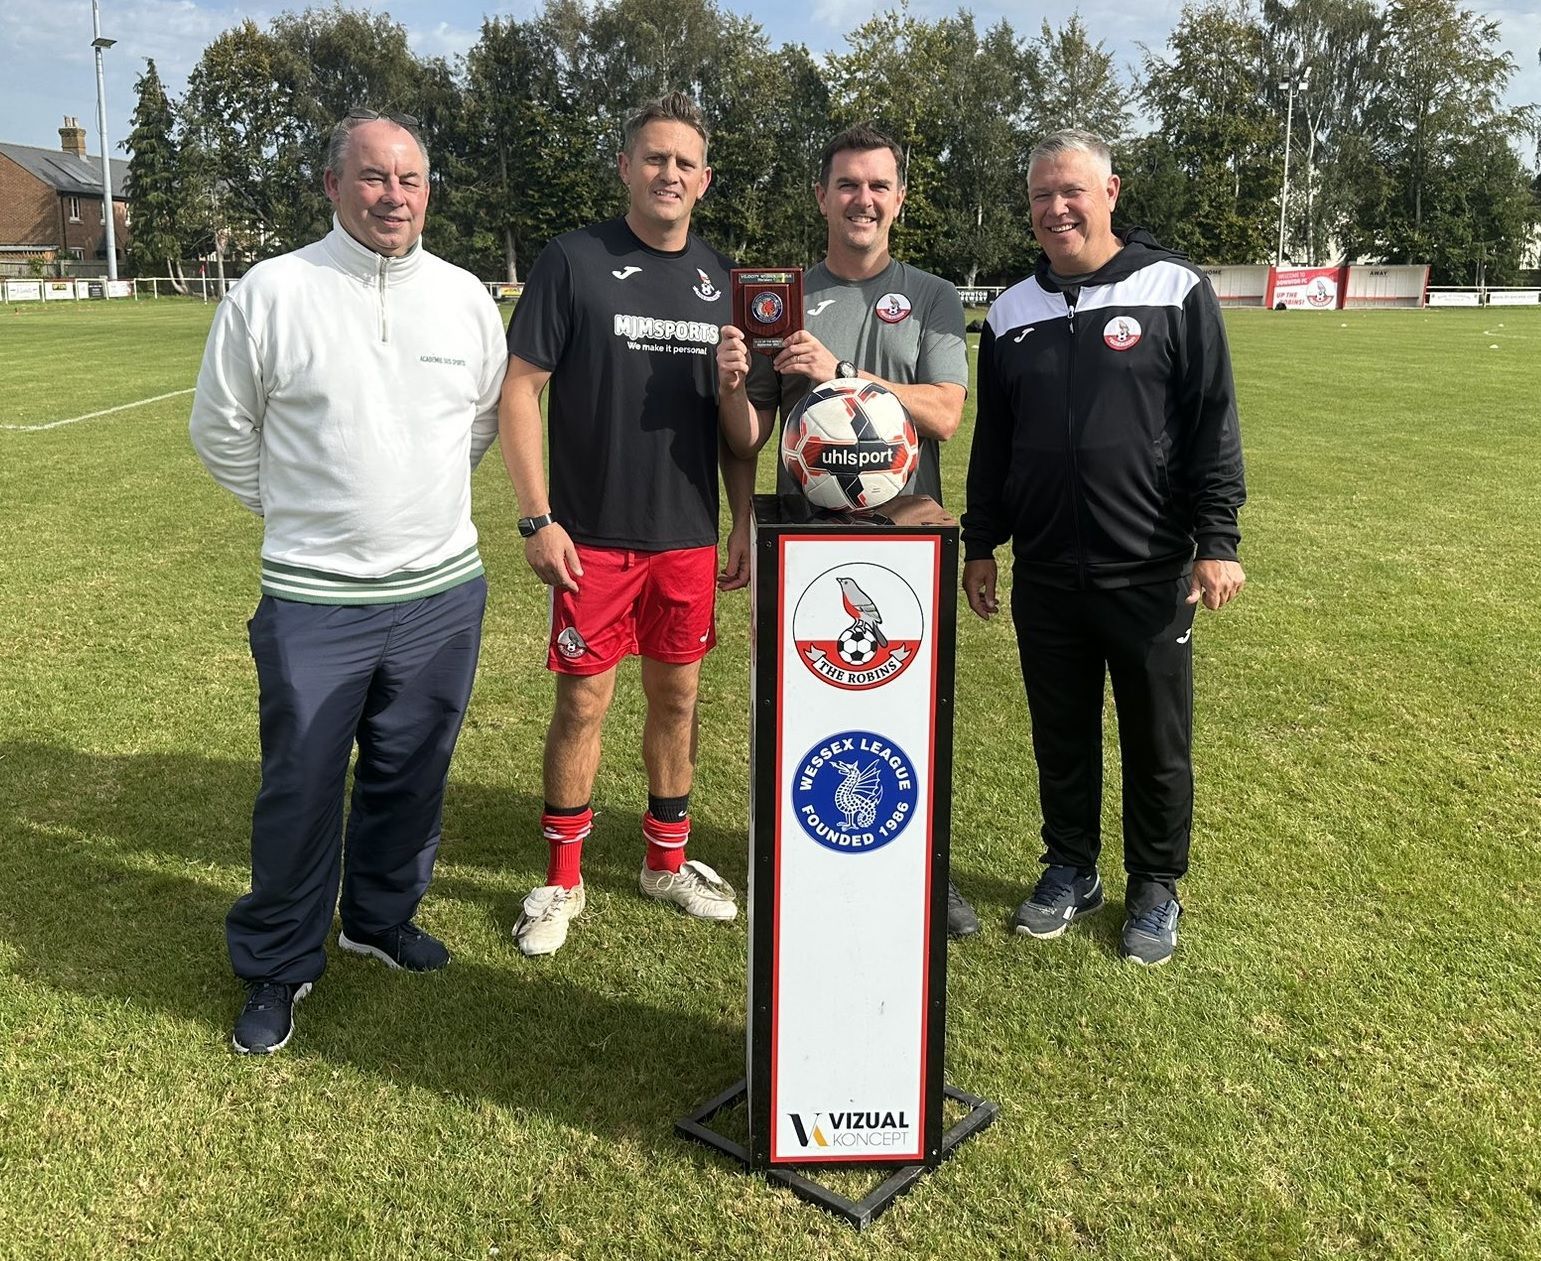 Petersfield Town's Head of Football, Mark Summerhill, receives the Division One Club of the Month for November from Wessex League official, Paul Scoble